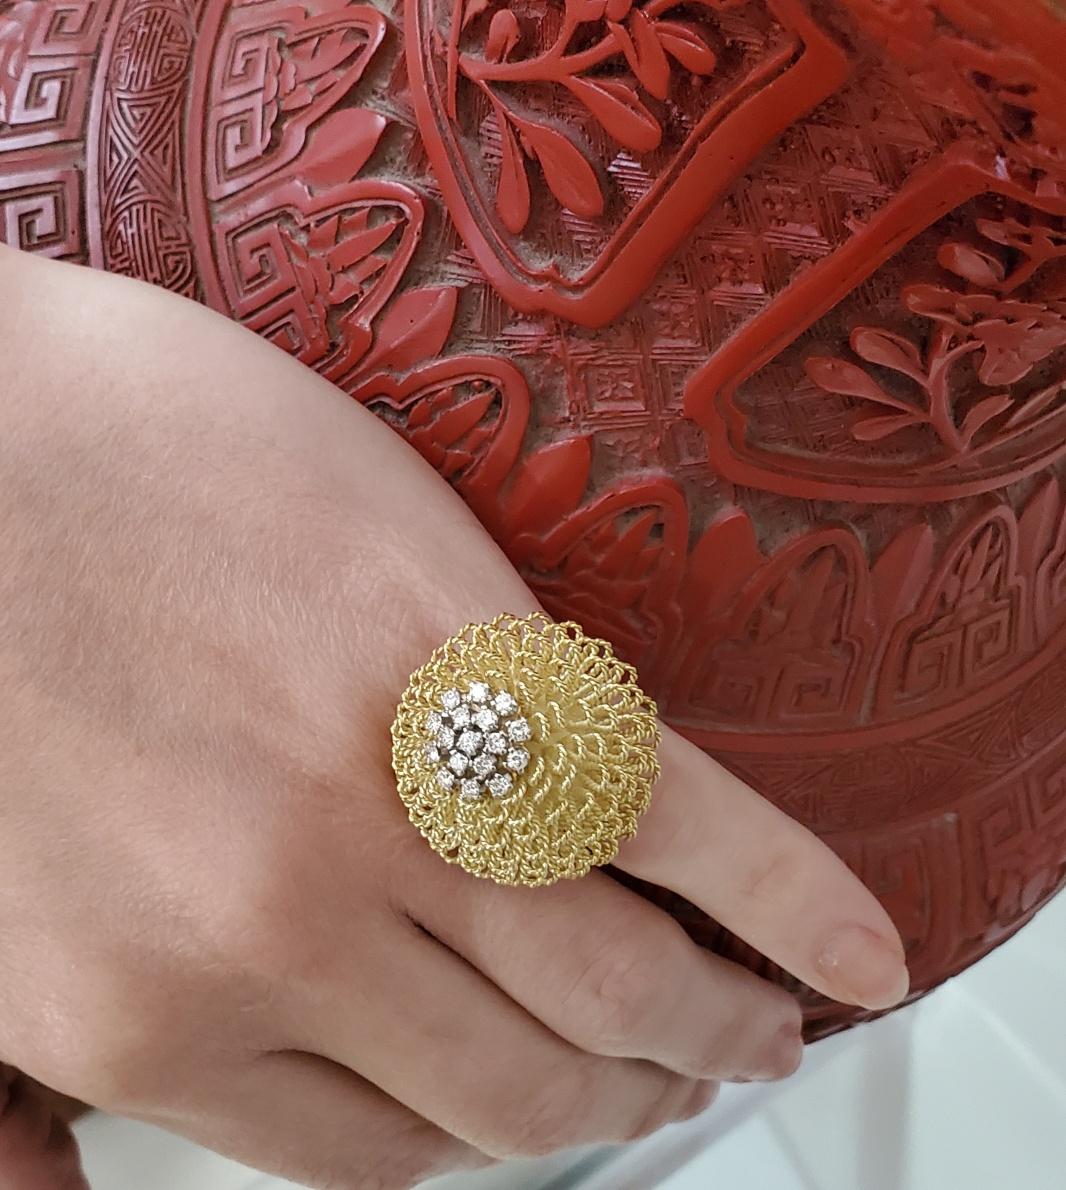 Retro modern diamond cocktail ring.

Beautiful bombe textured cocktail ring, created in Italy during the post war period, back in the early 1960. This bold high profile ring was carefully crafted with an intricate pattern of twisted wires in solid